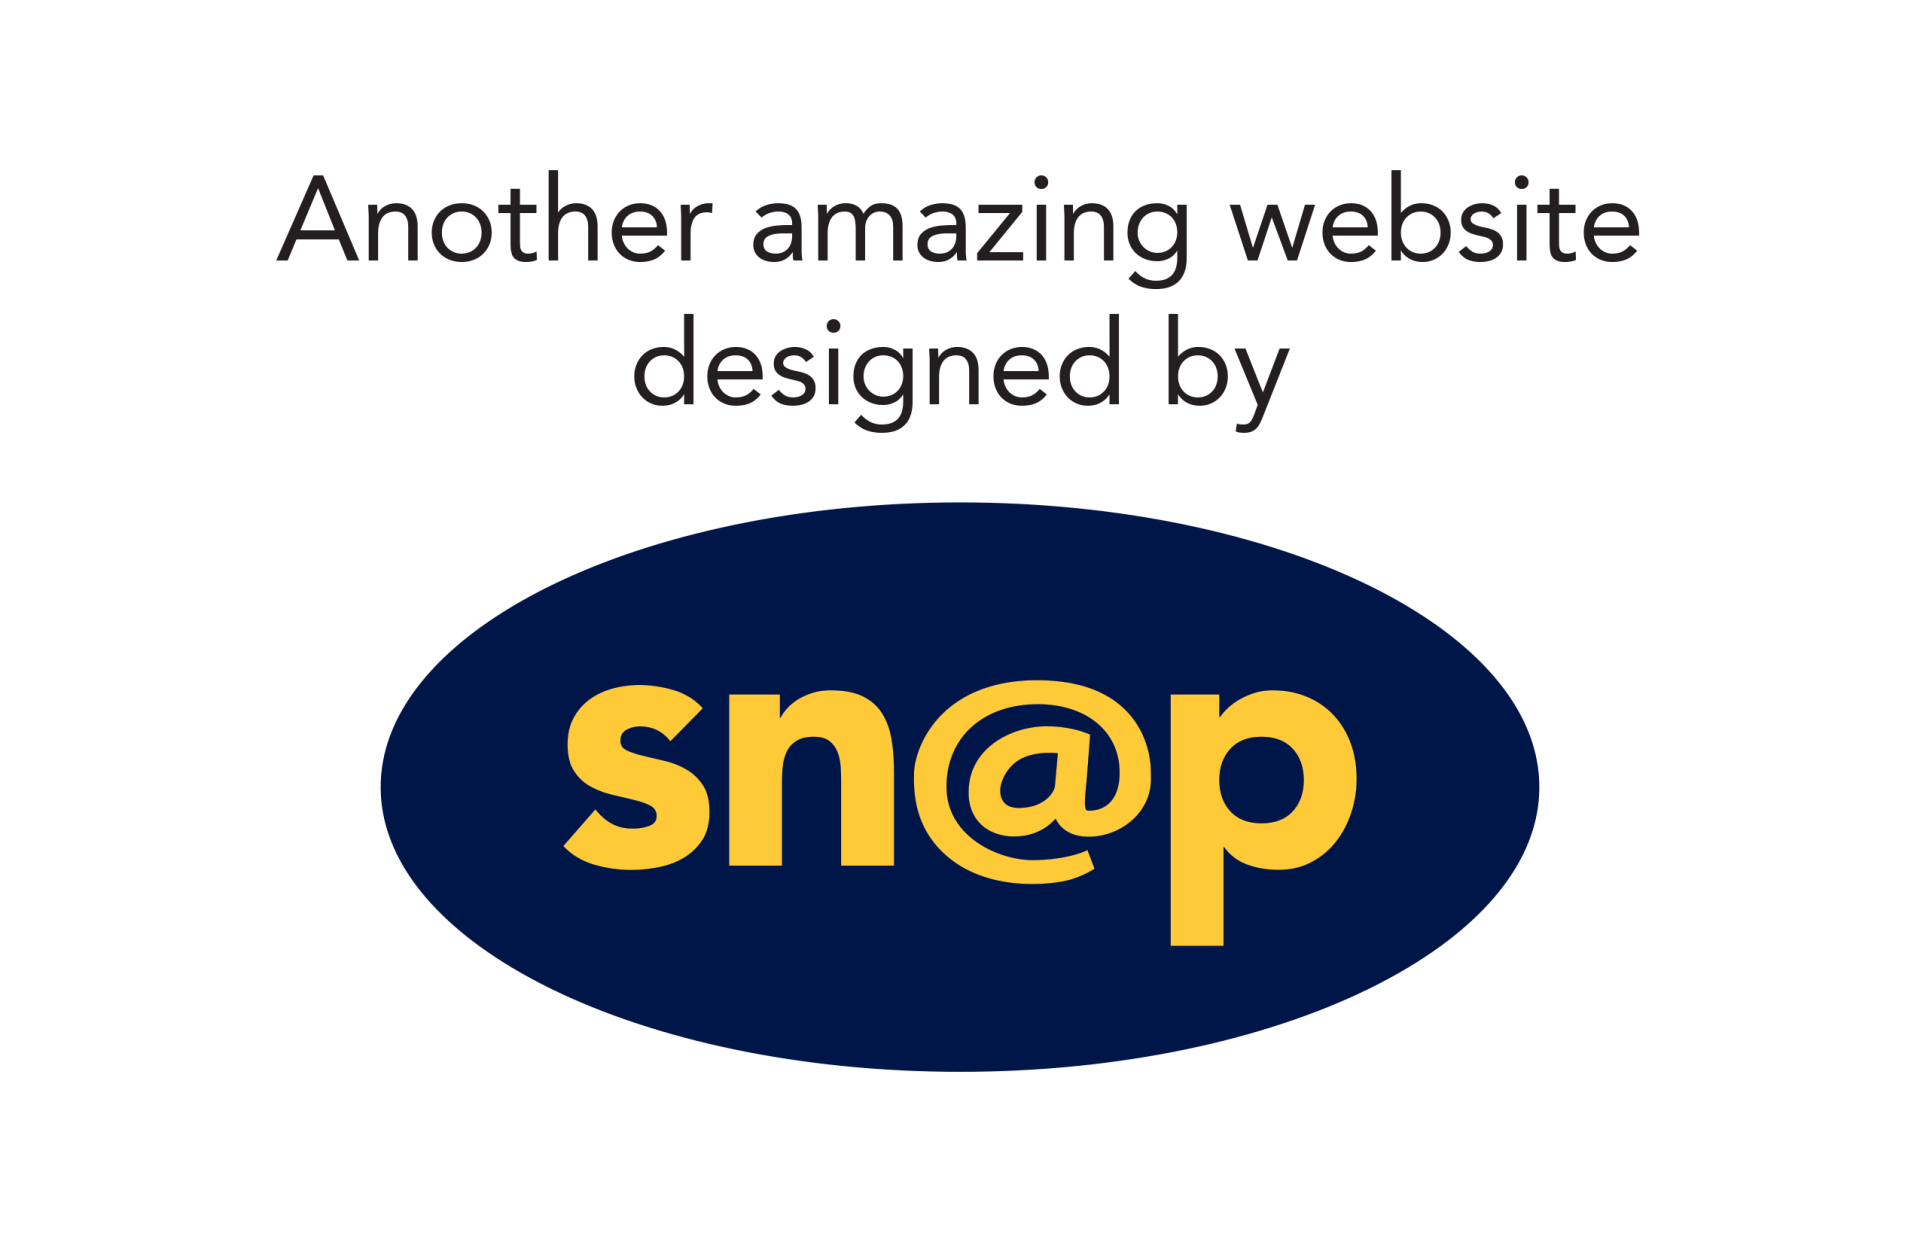 A logo for another amazing website designed by snap